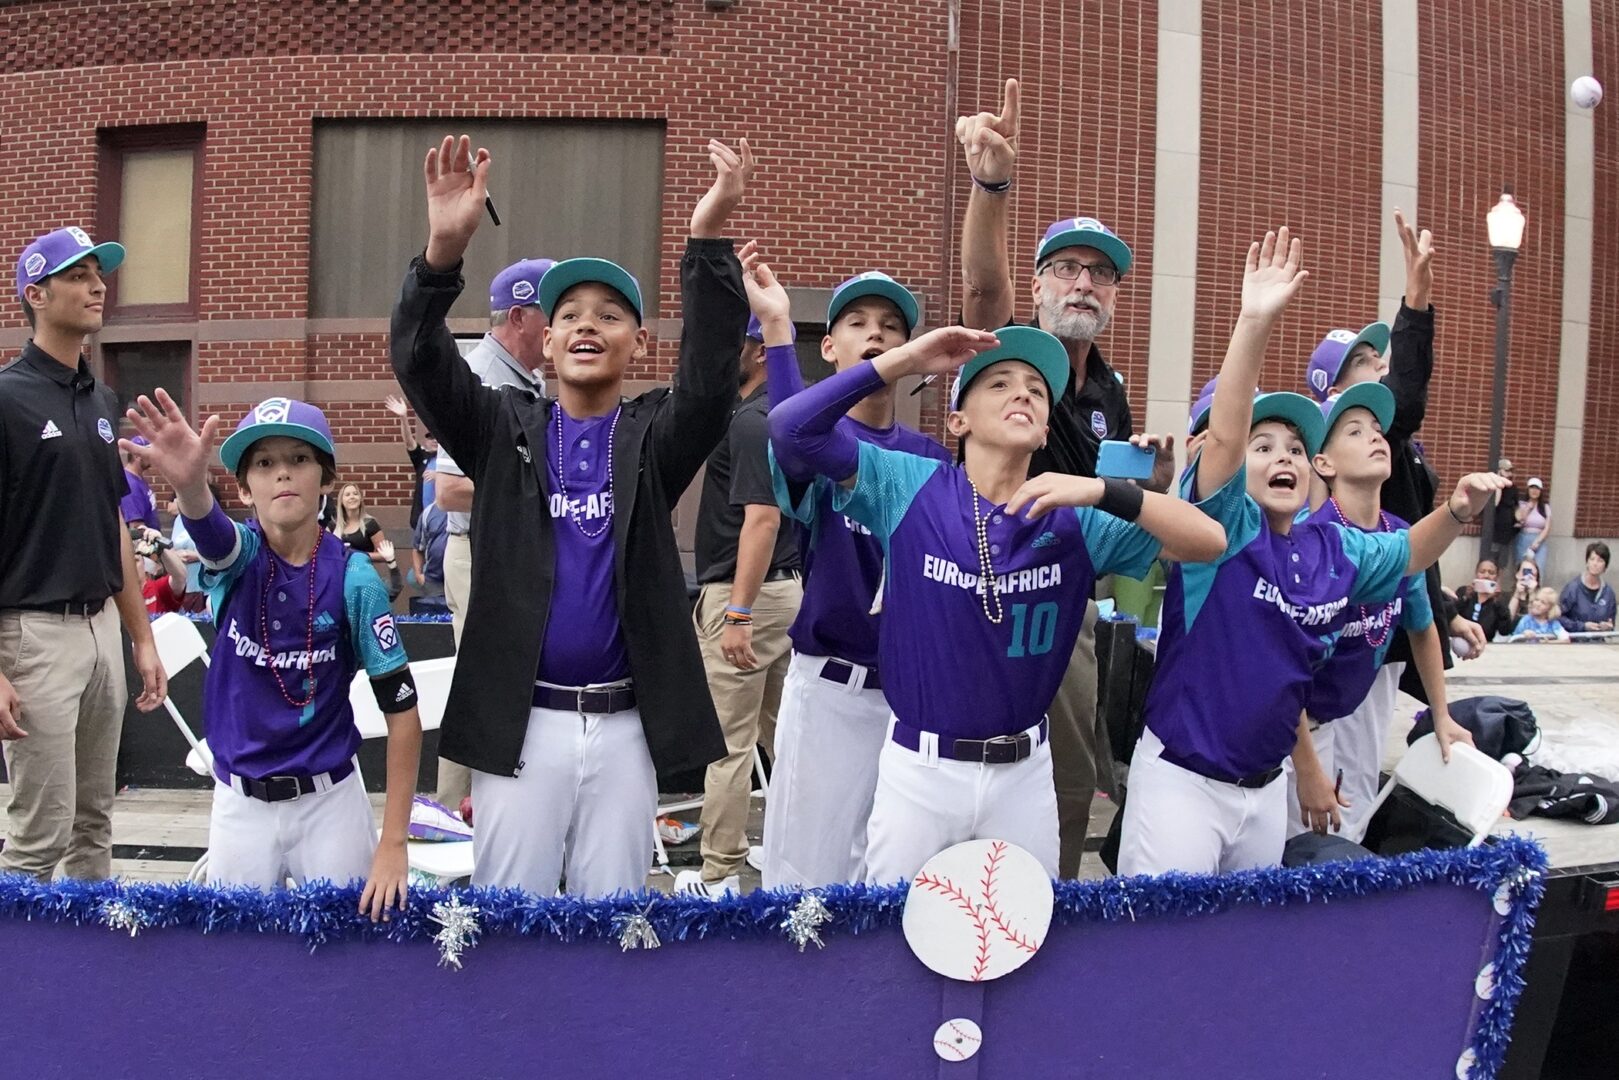 The return of youth baseball brings a sense of normalcy to kids